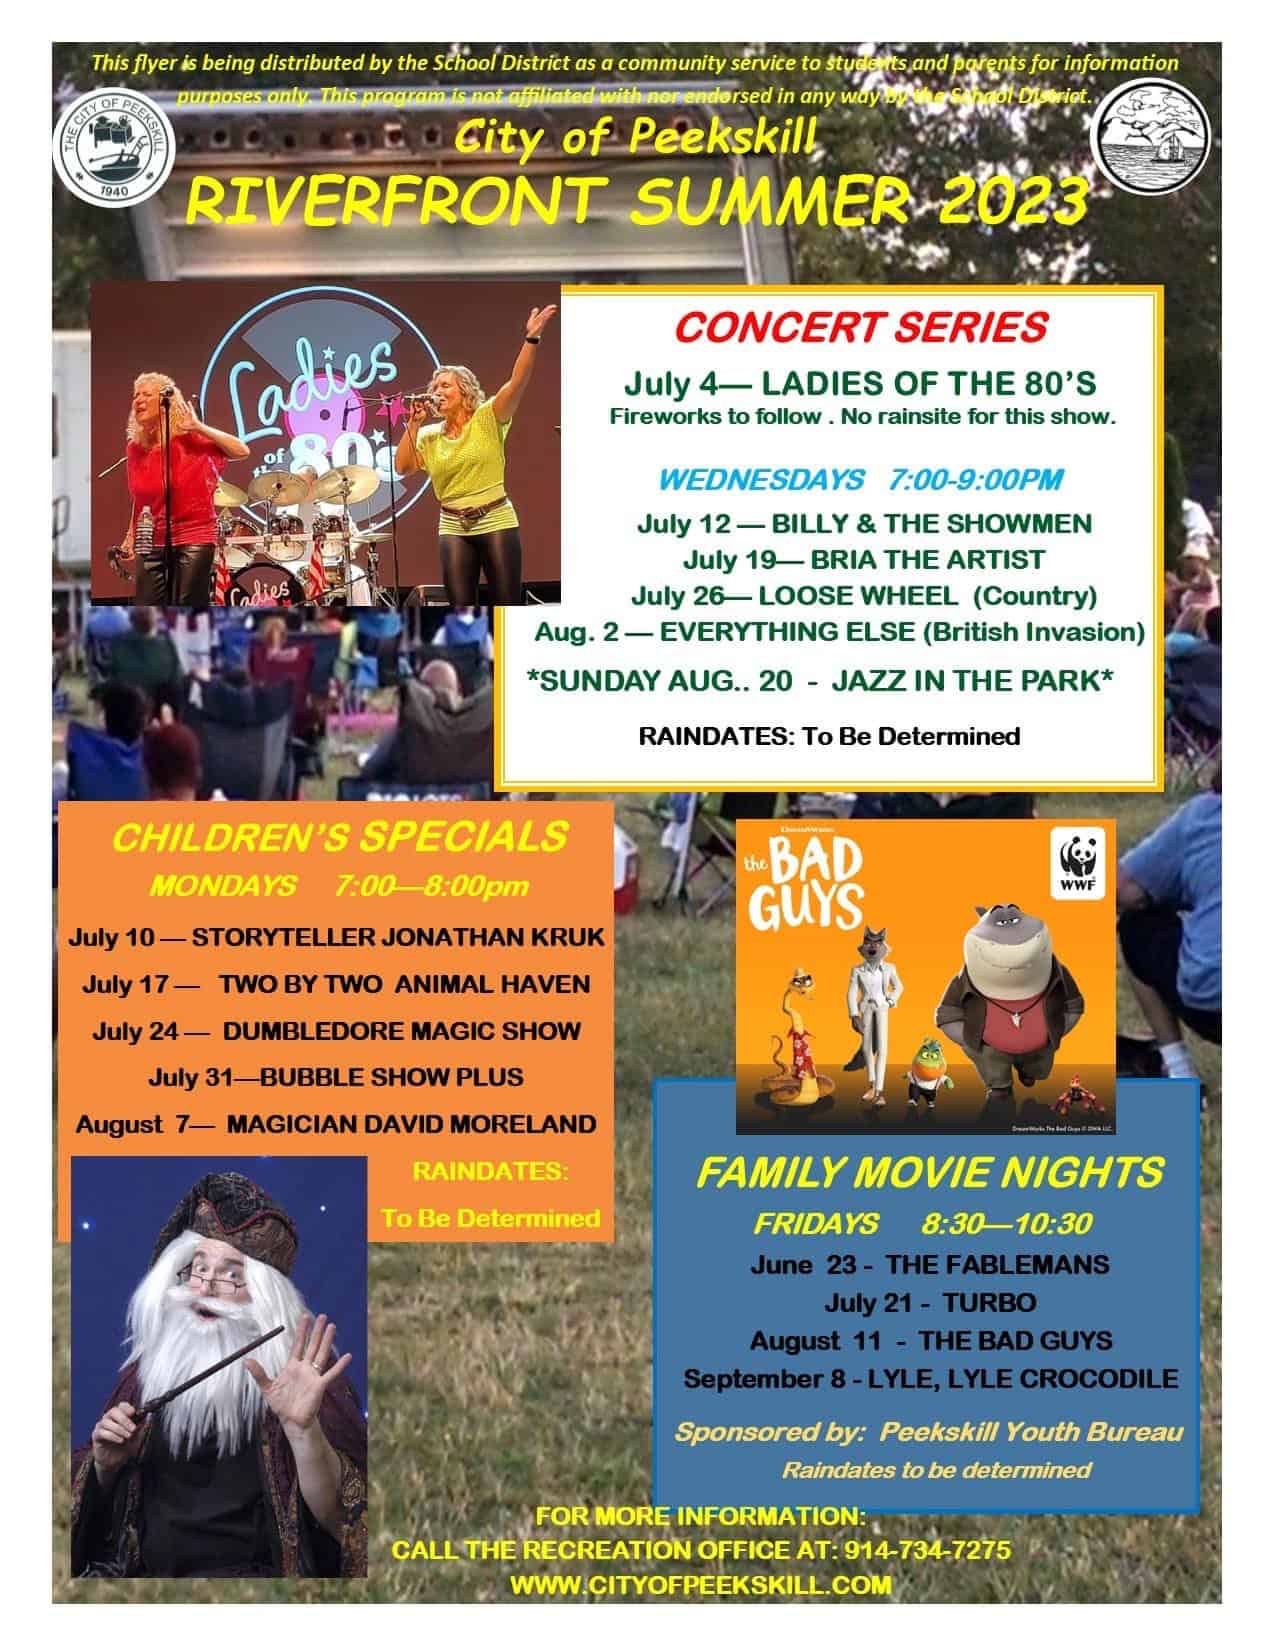 Flier for Riverfront Summer 2023 events from Parks & Rec